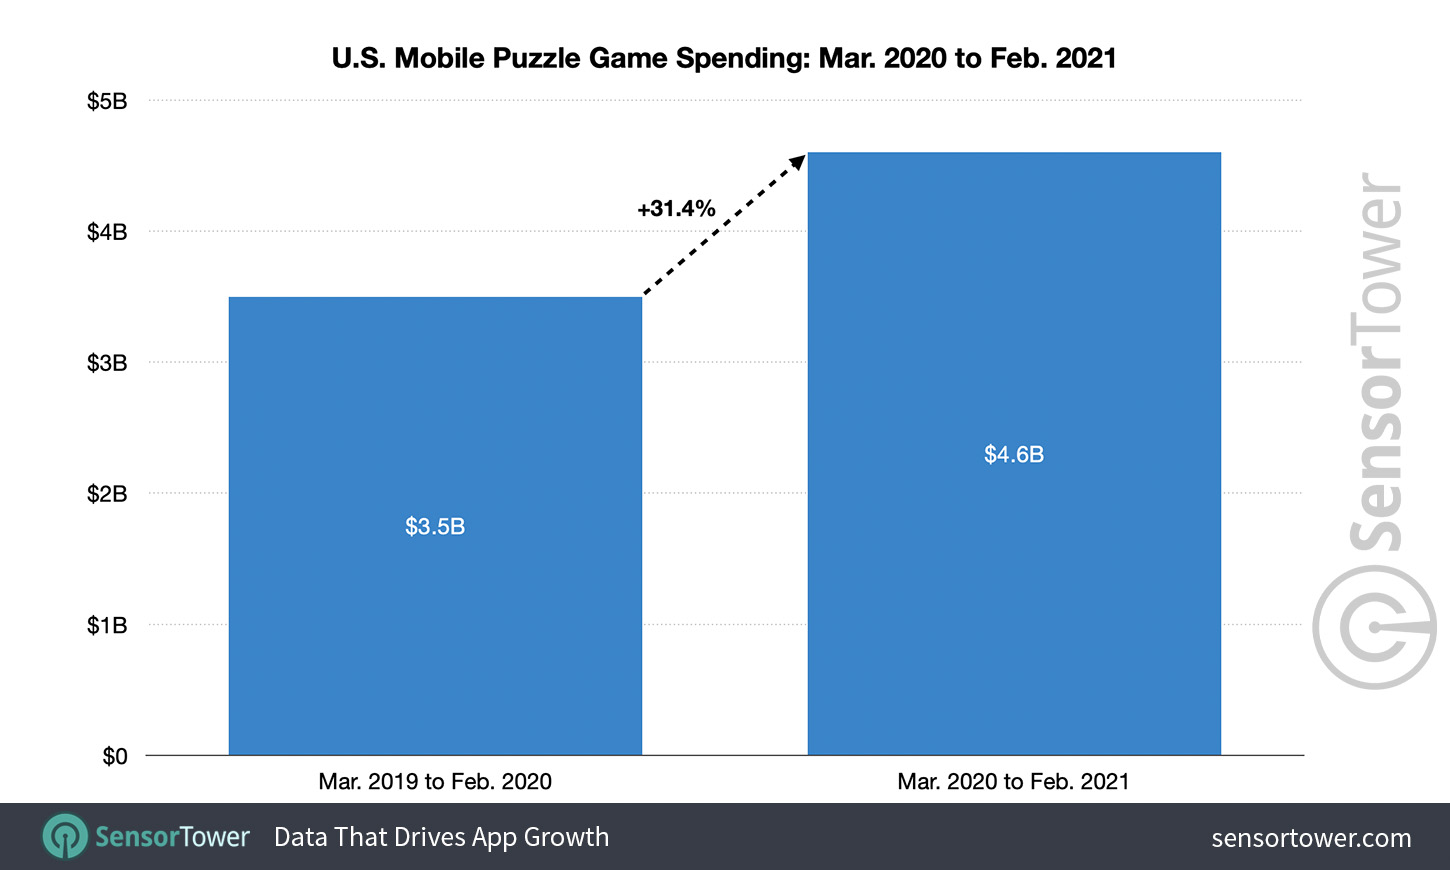 U.S. Mobile Puzzle Game Spending: March 2020 to February 2021